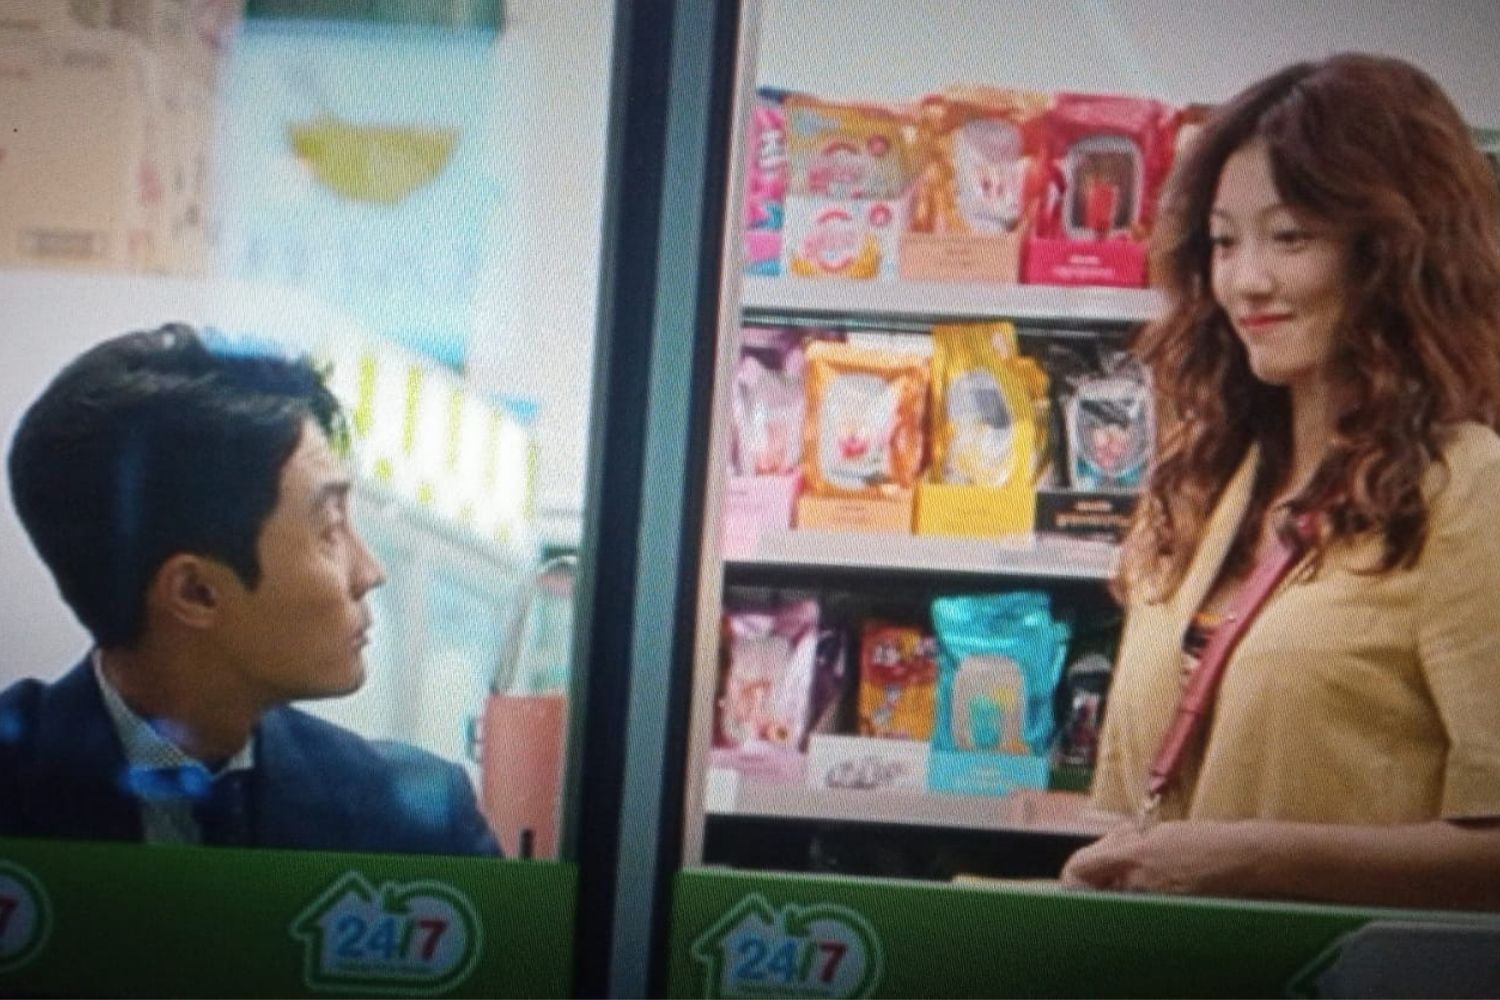 Featuring Yeom Ki Jung asking her boss about the lottery tickets.